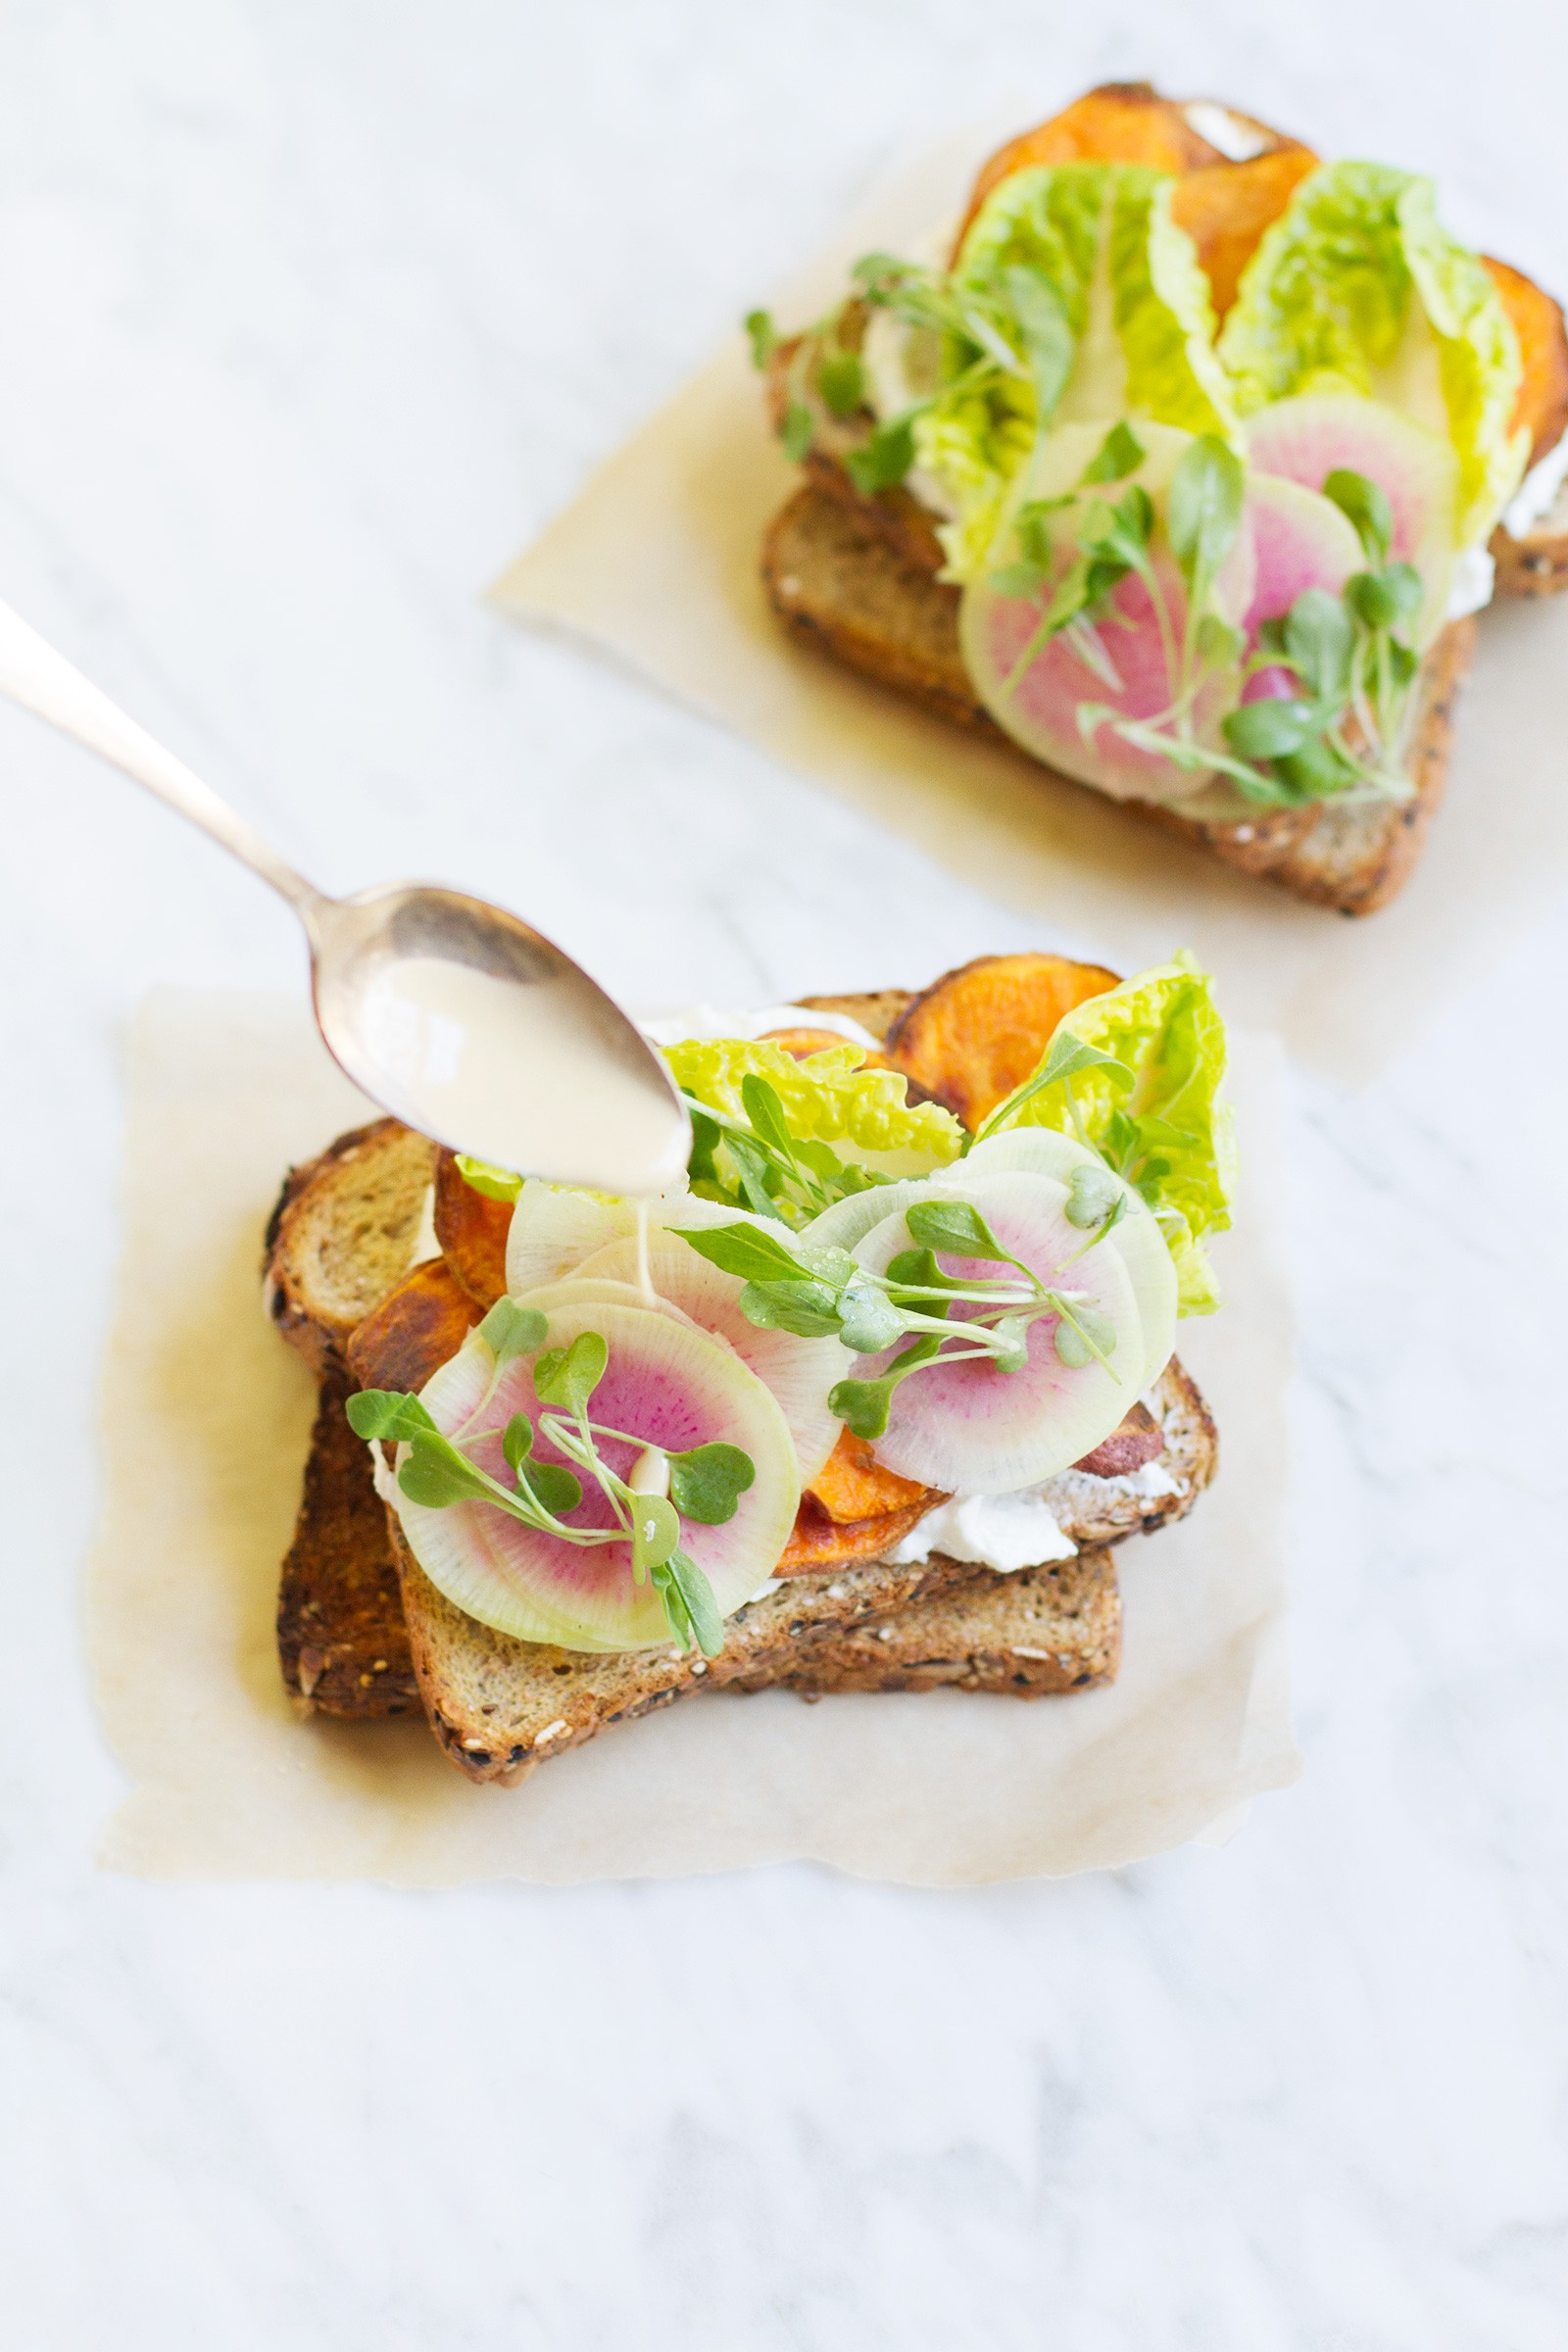 Healthy Vegetarian Sandwich Recipes
 Pack For The Plane 10 Healthy Recipes to Make Ahead for